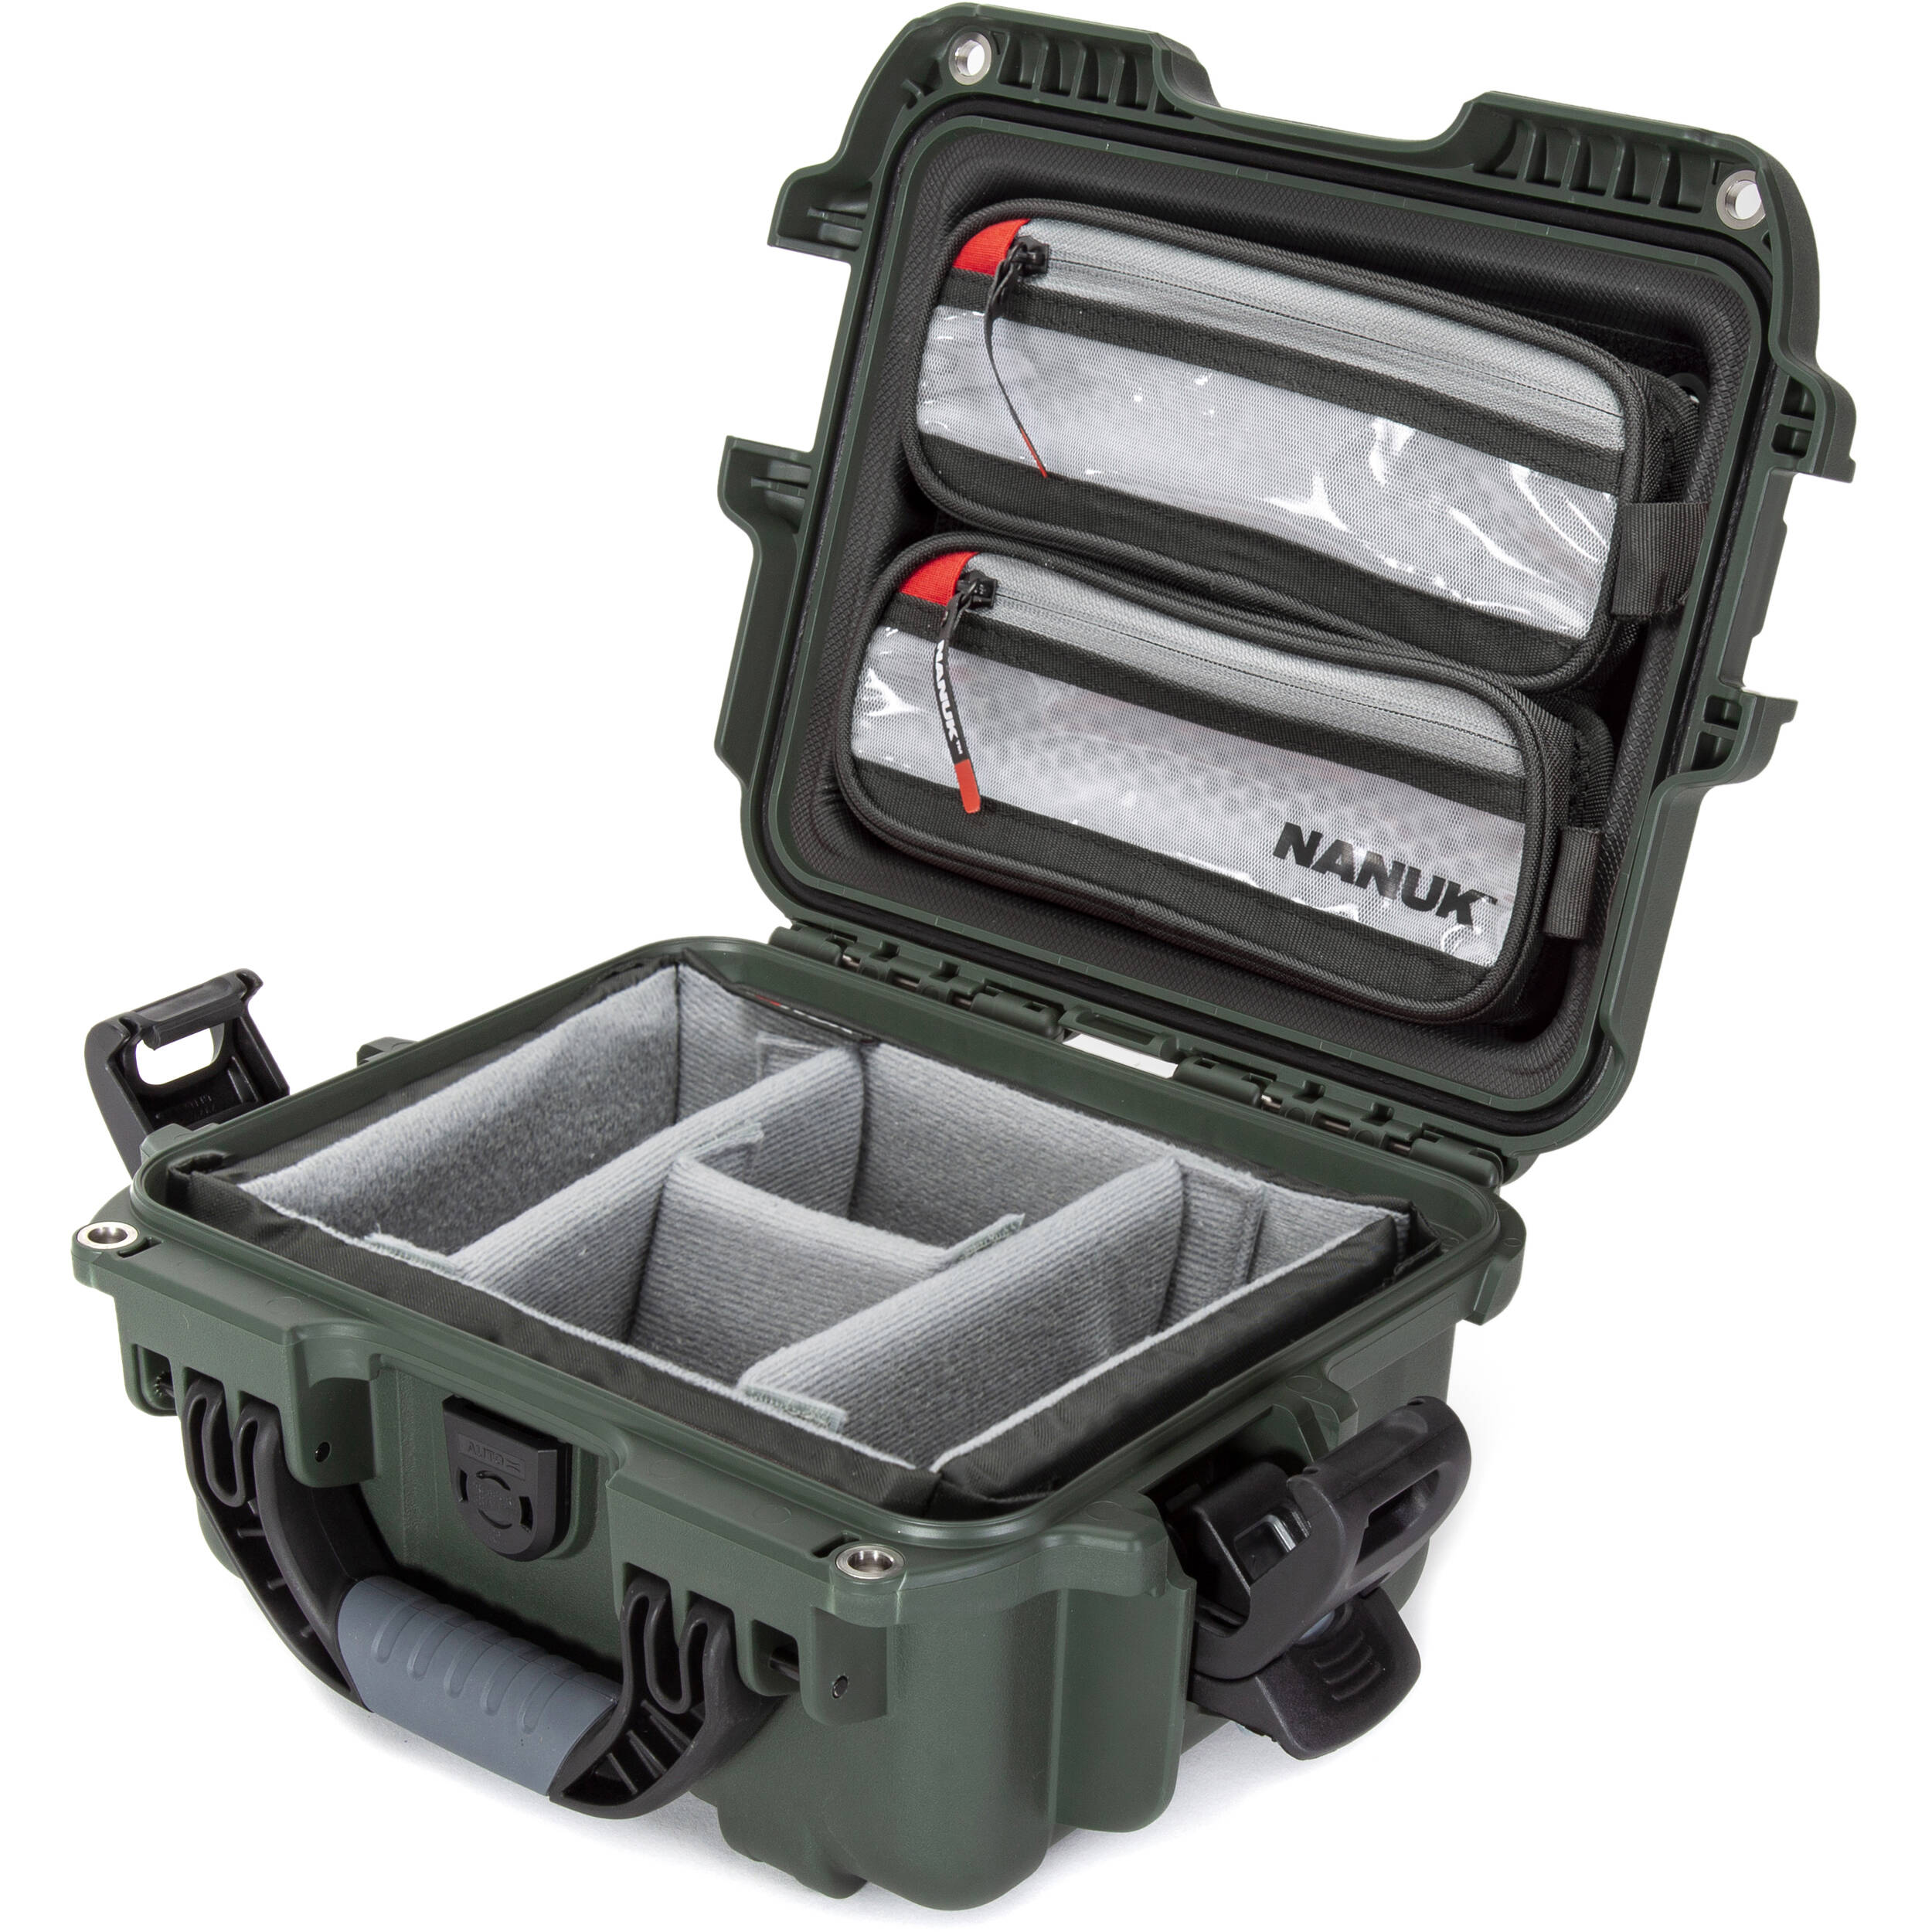 Nanuk 905 Waterproof Hard Case Pro Photo/Video Kit with Padded Dividers and Lid Organizer (Olive)